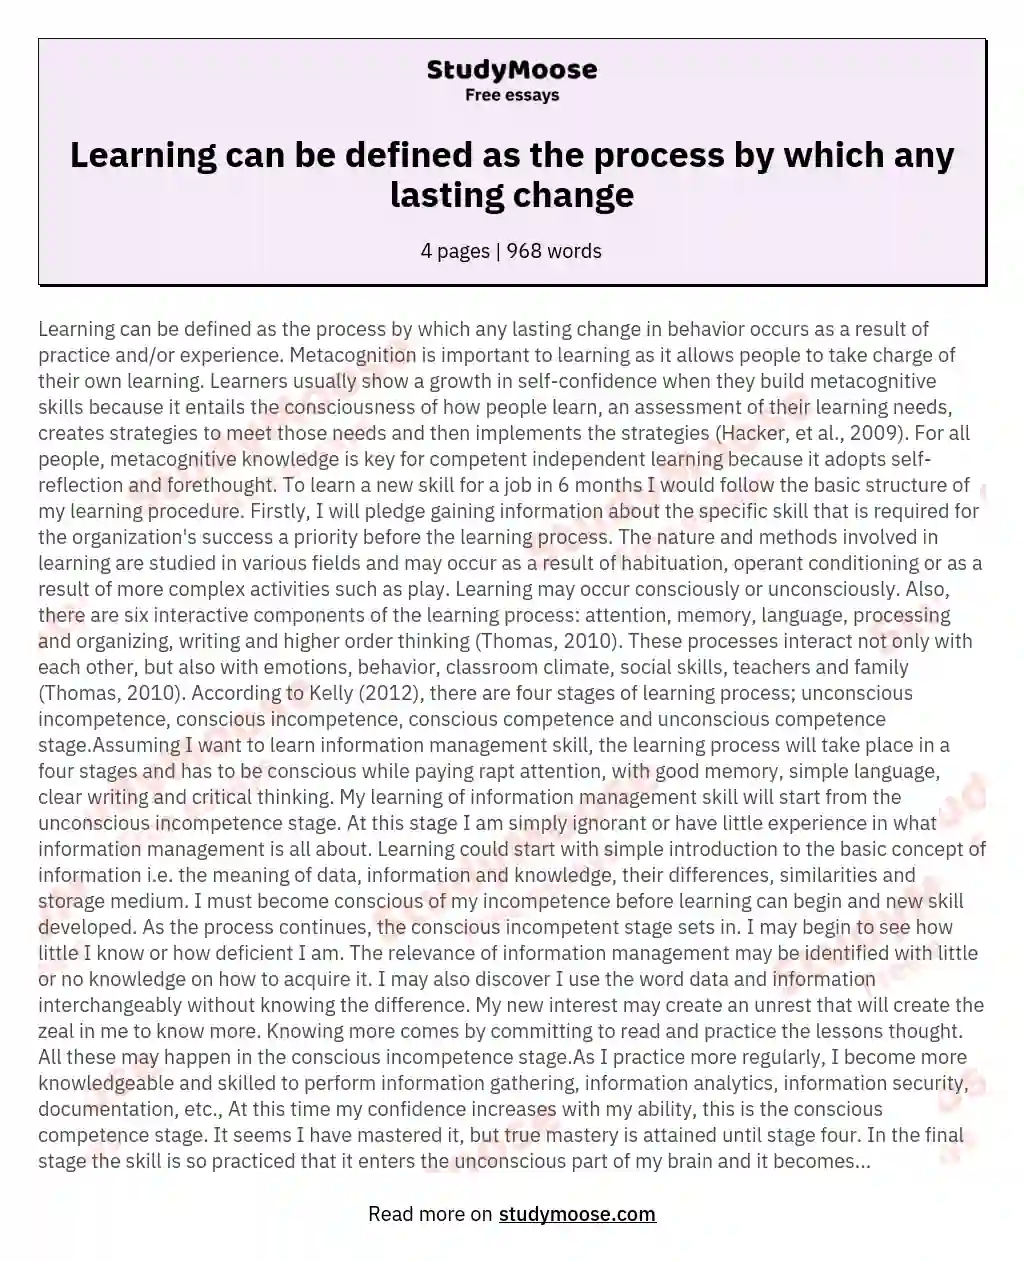 Learning can be defined as the process by which any lasting change